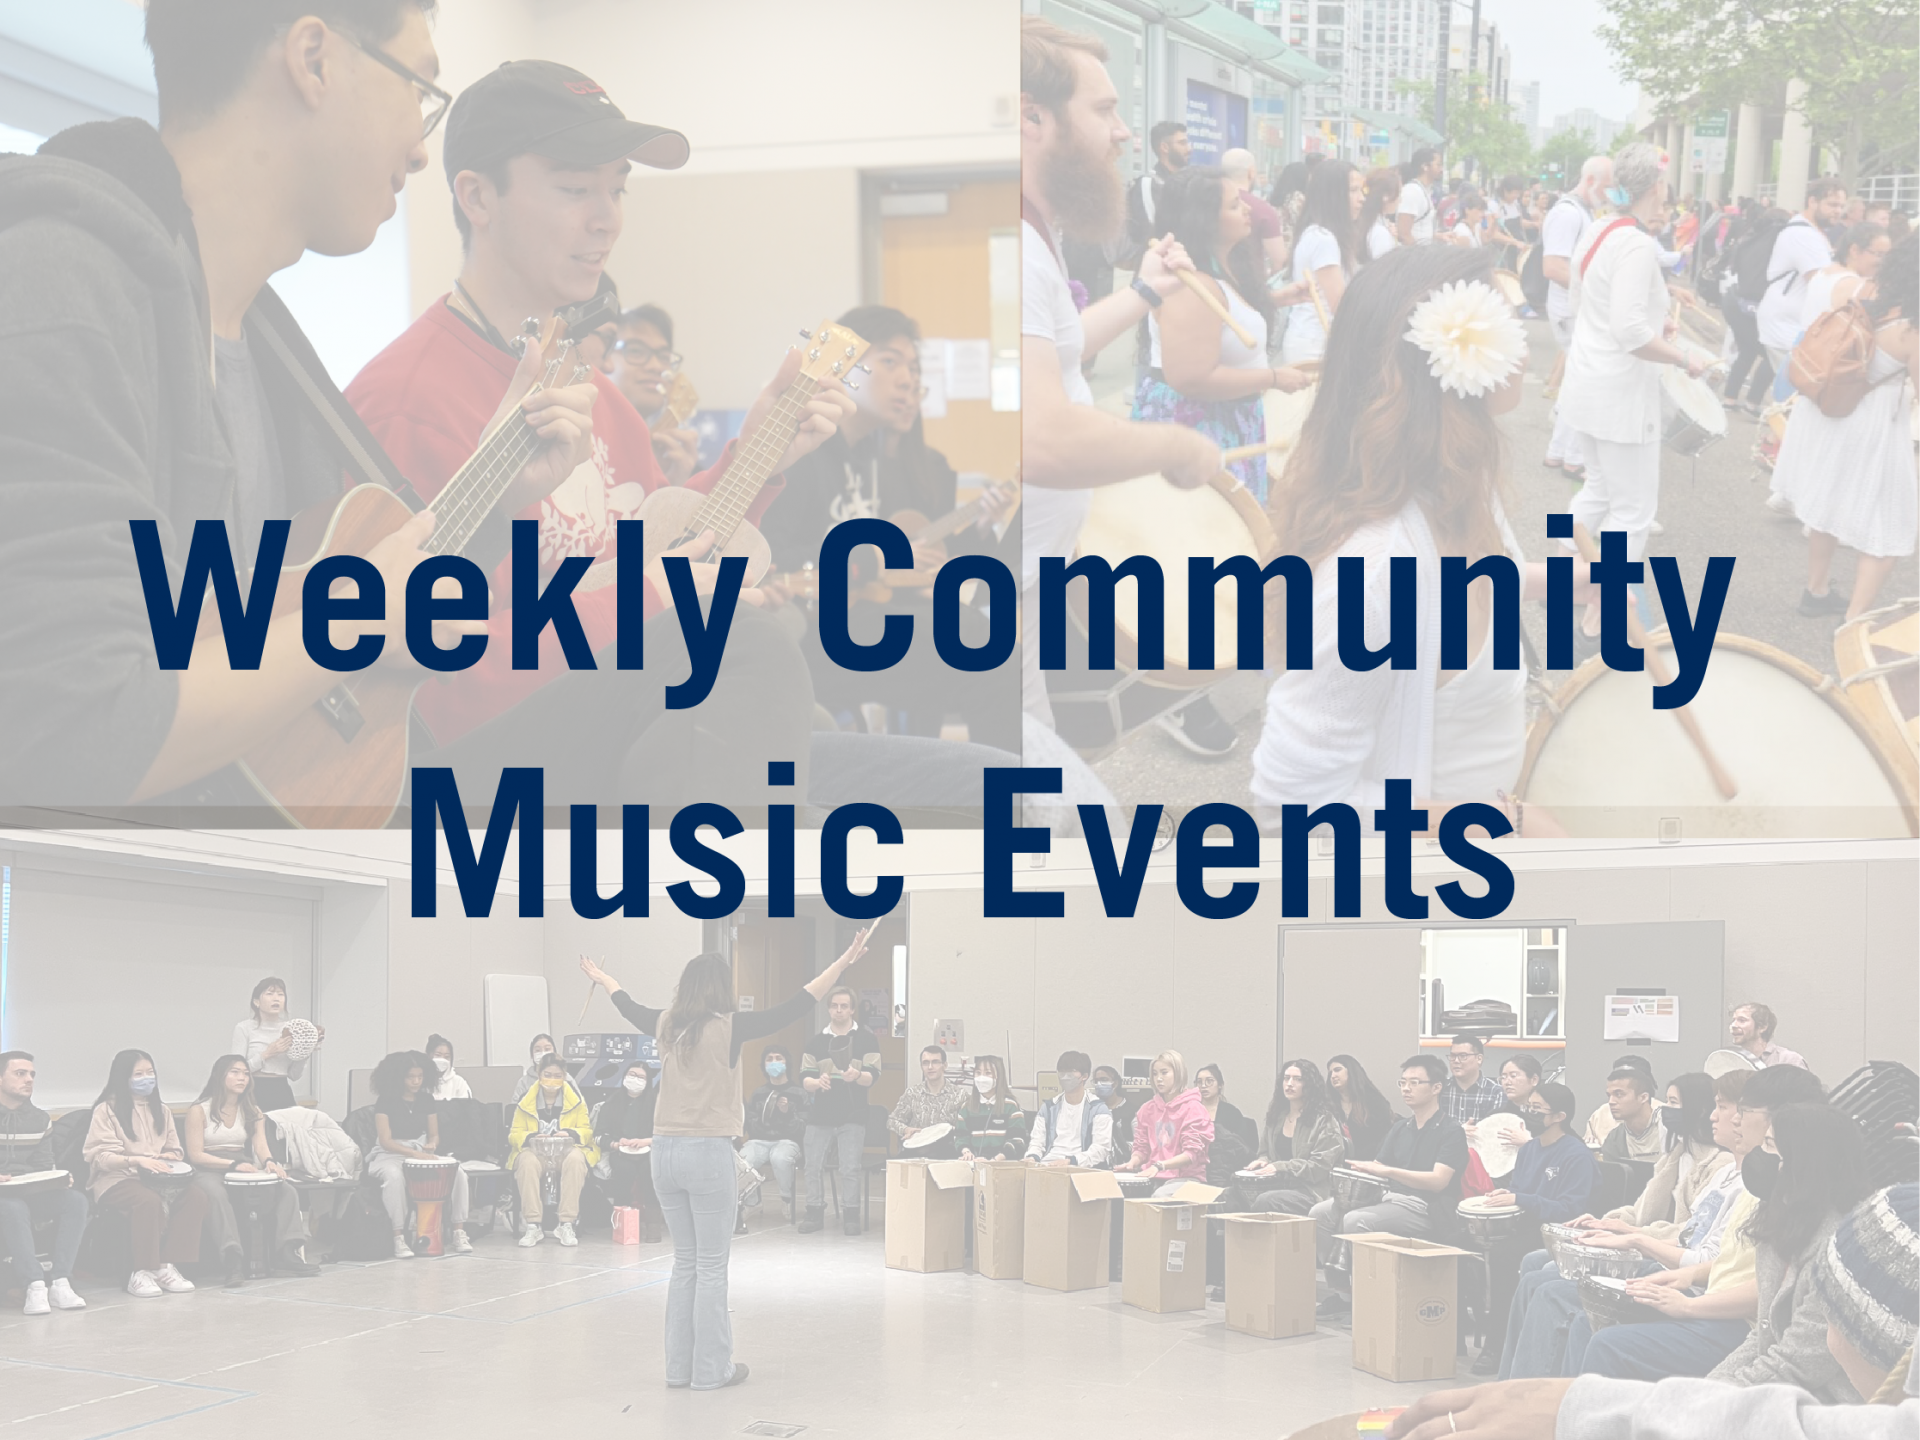 faded images of past events of people playing ukuleles and drumming over the text Weekly Community Music Events